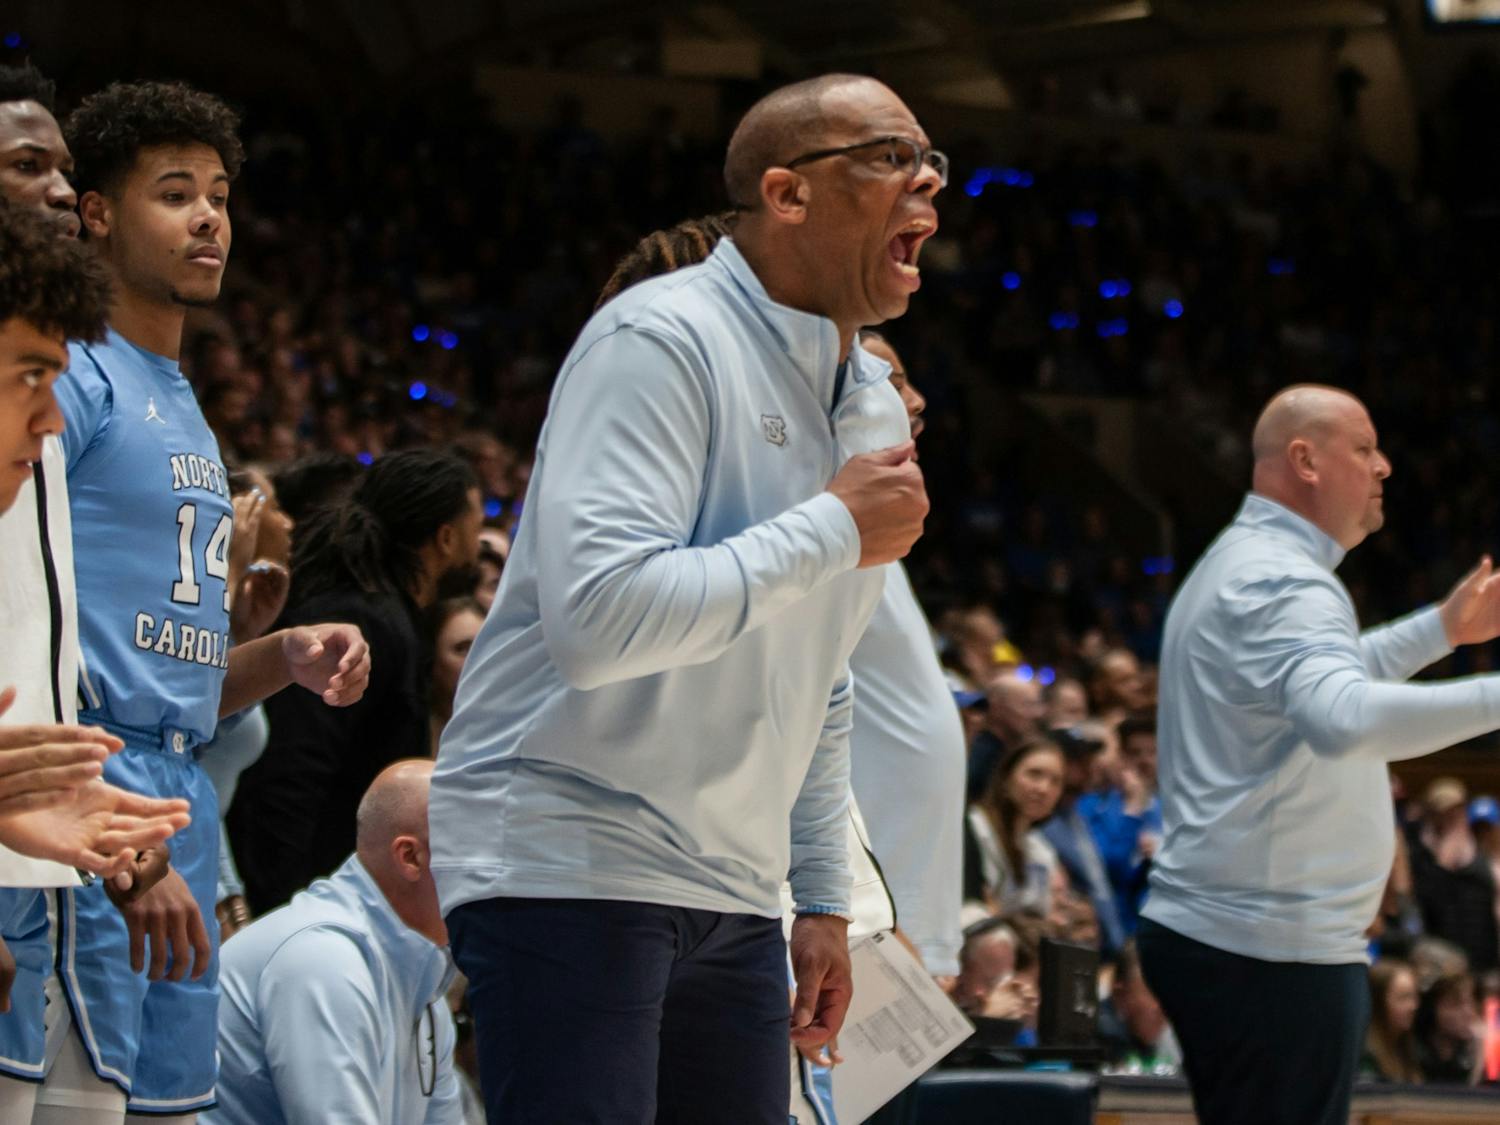 UNC Head Coach Hubert Davis shouts during the men's basketball game against Duke on Feb. 4, 2023 at Cameron Indoor Stadium. UNC lost 63-57.